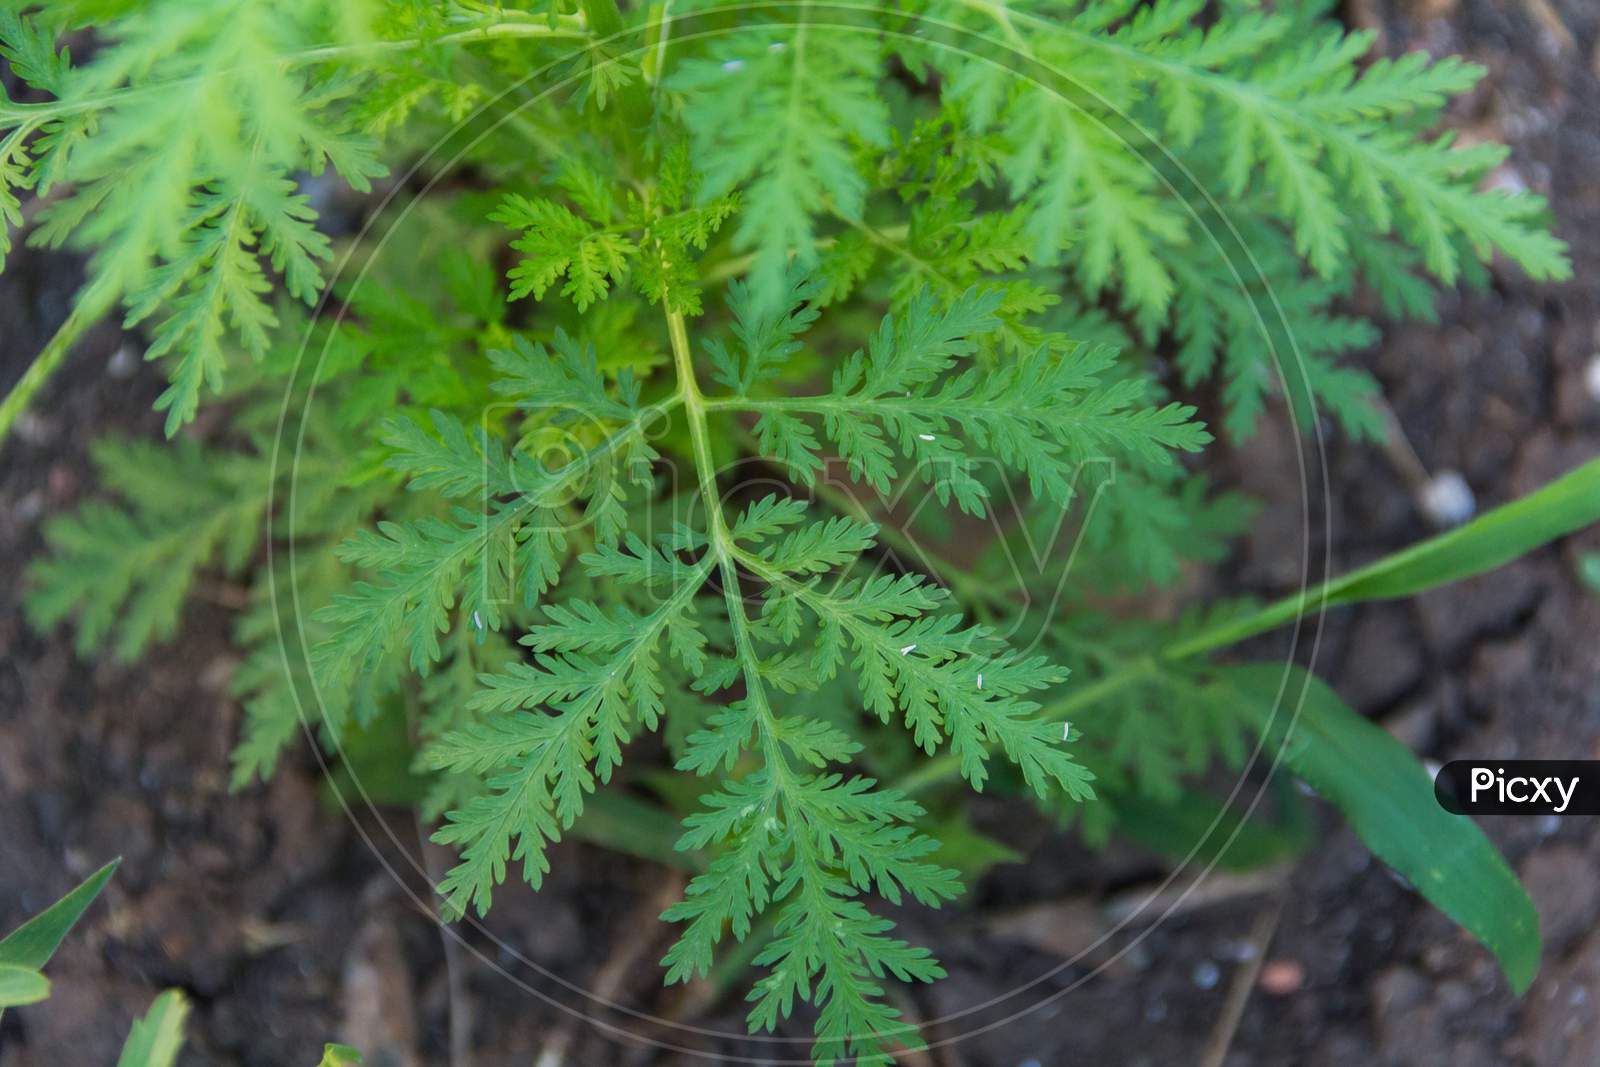 Leaves And Branches Of Mugwort Annua Or Sweet Wormwood That Grows Wild In The Argentine Mountains And Is Used For Alternative Medicine